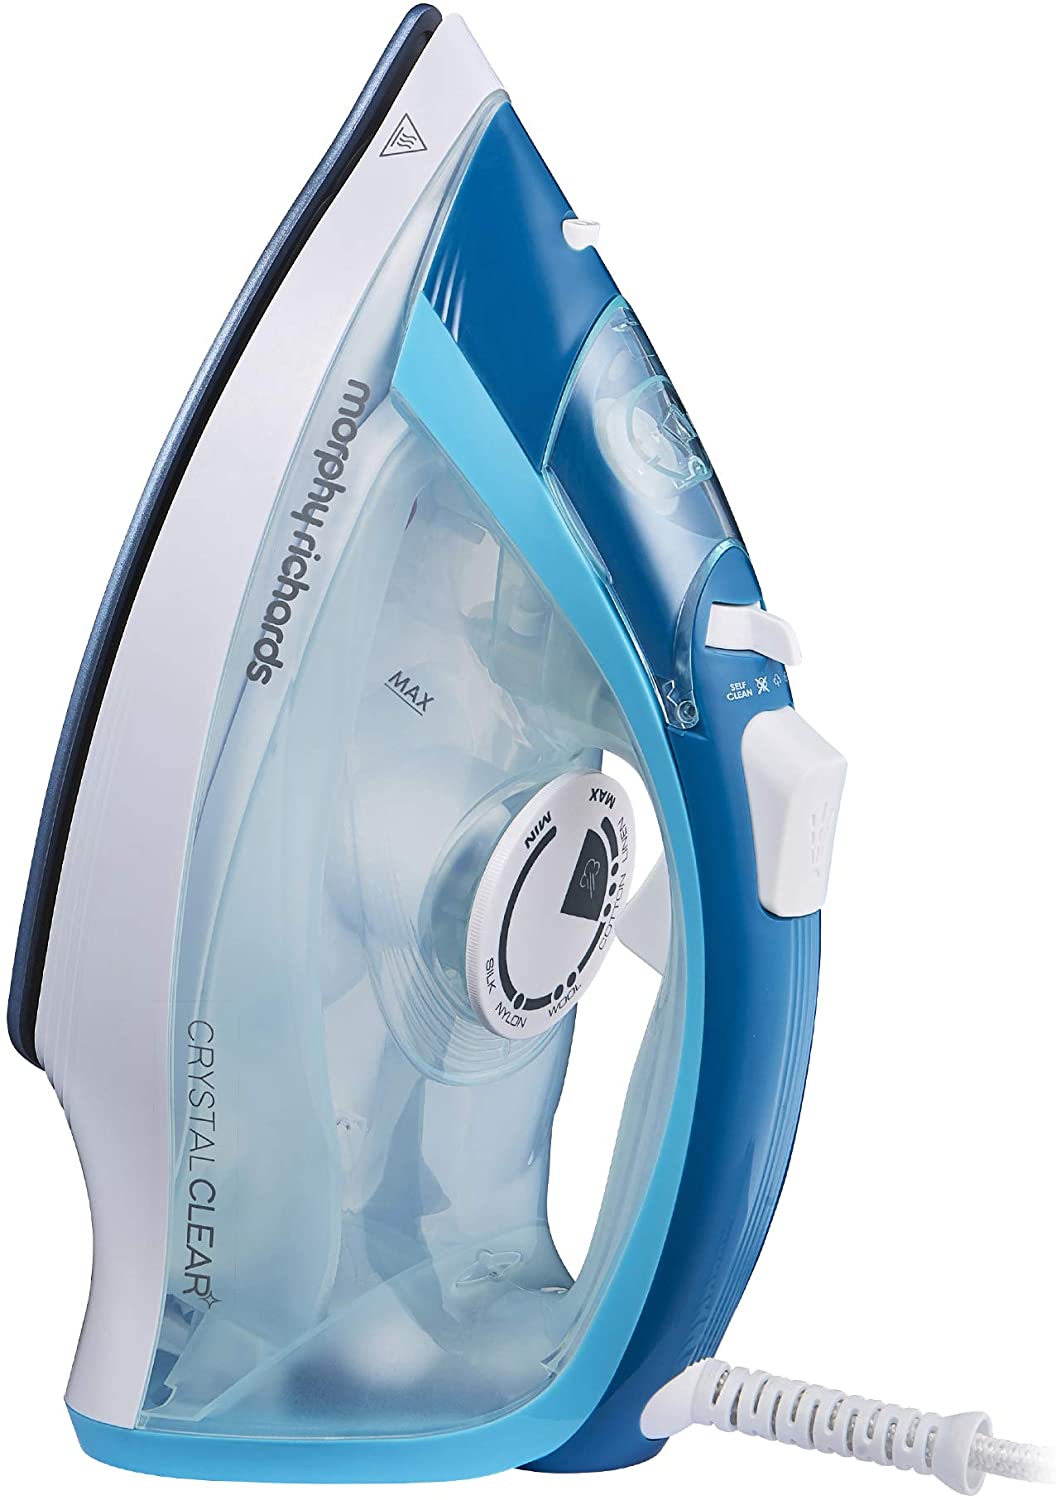 Morphy Richards 300300 Crystal Clear Steam Iron 2400W Turqoise/White